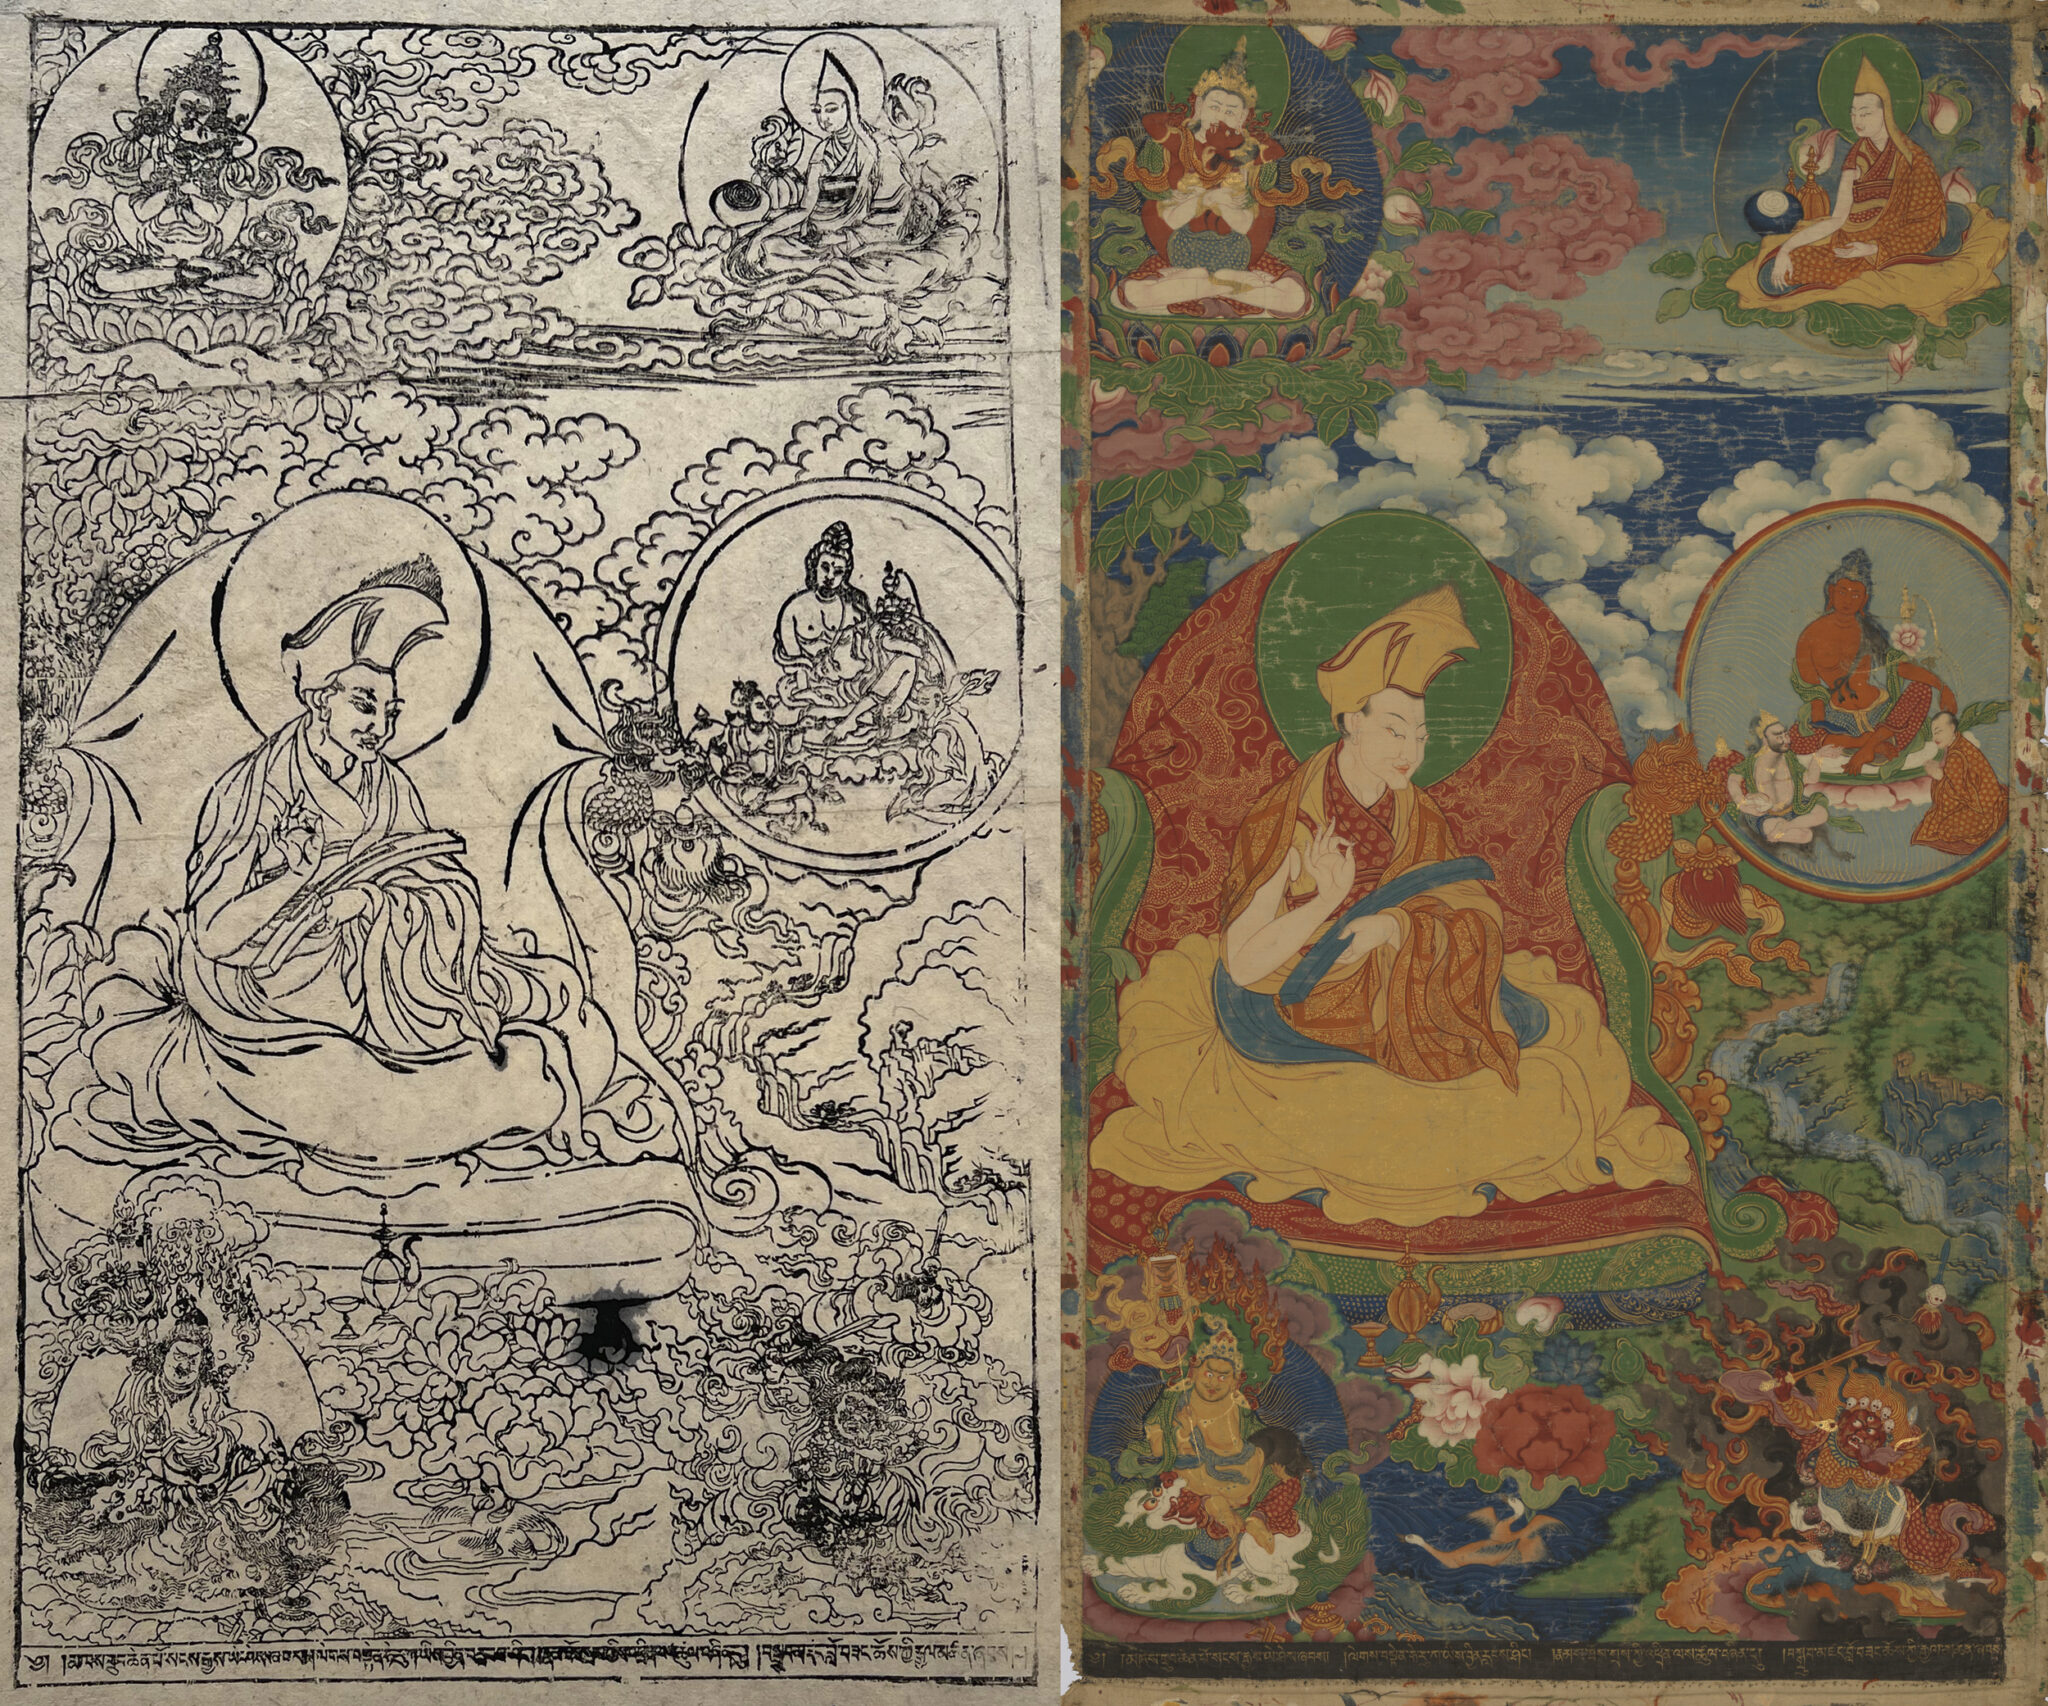 Side-by-side depictions of robed figure amid landscape and figures in roundels: at left, black and white outline of image; at right, full color